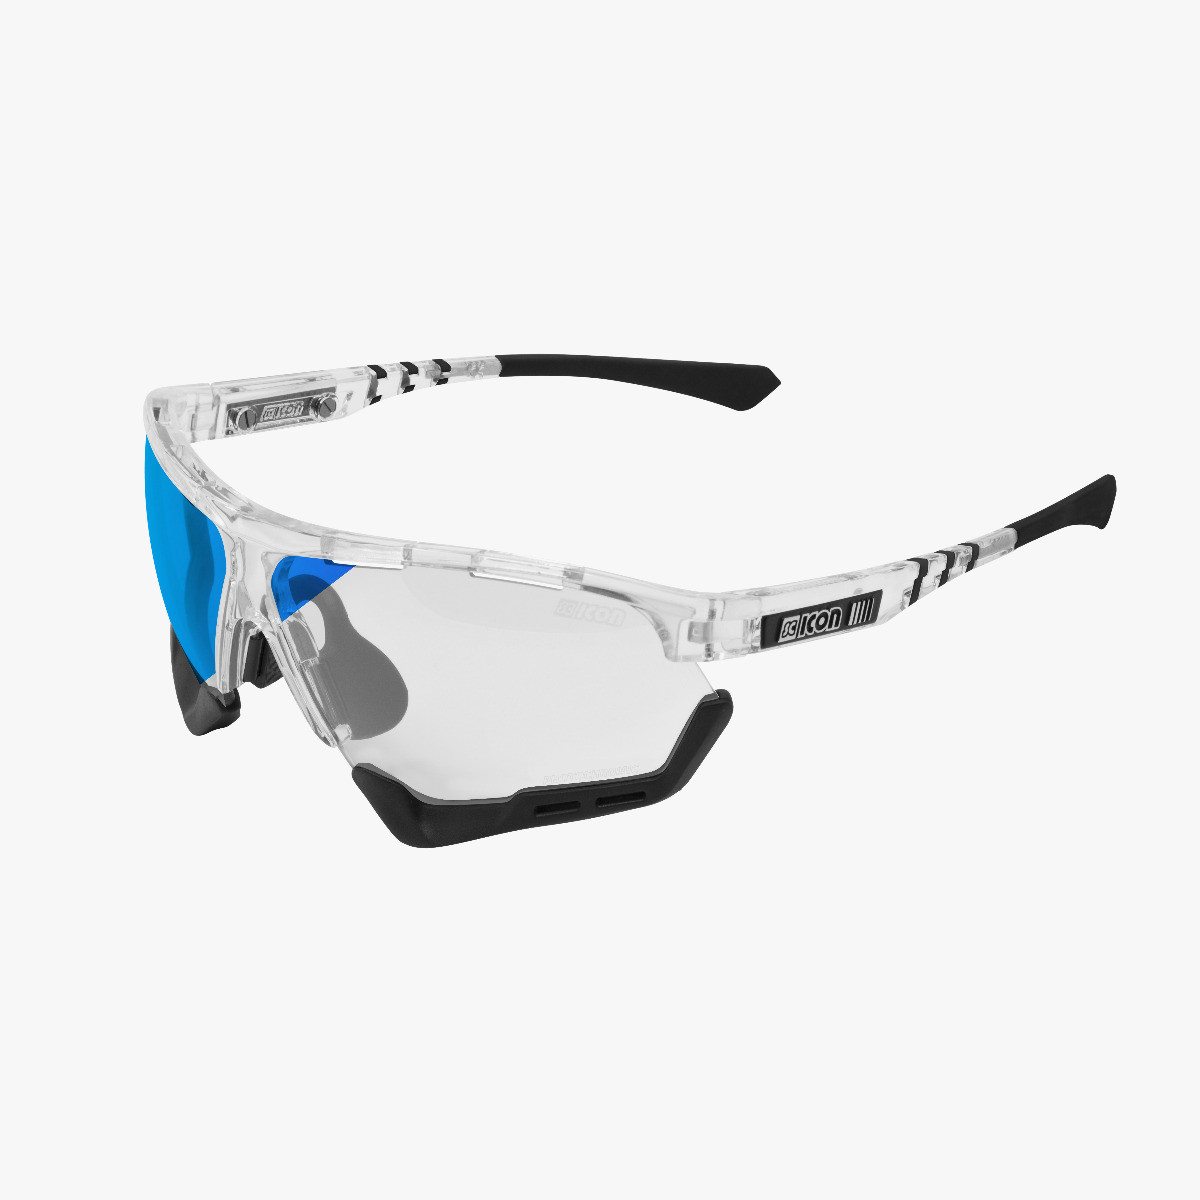 Scicon Sports | Aerocomfort Sport Cycling Performance Sunglasses - Crystal Gloss / Photocromatic Blue - EY15130702
